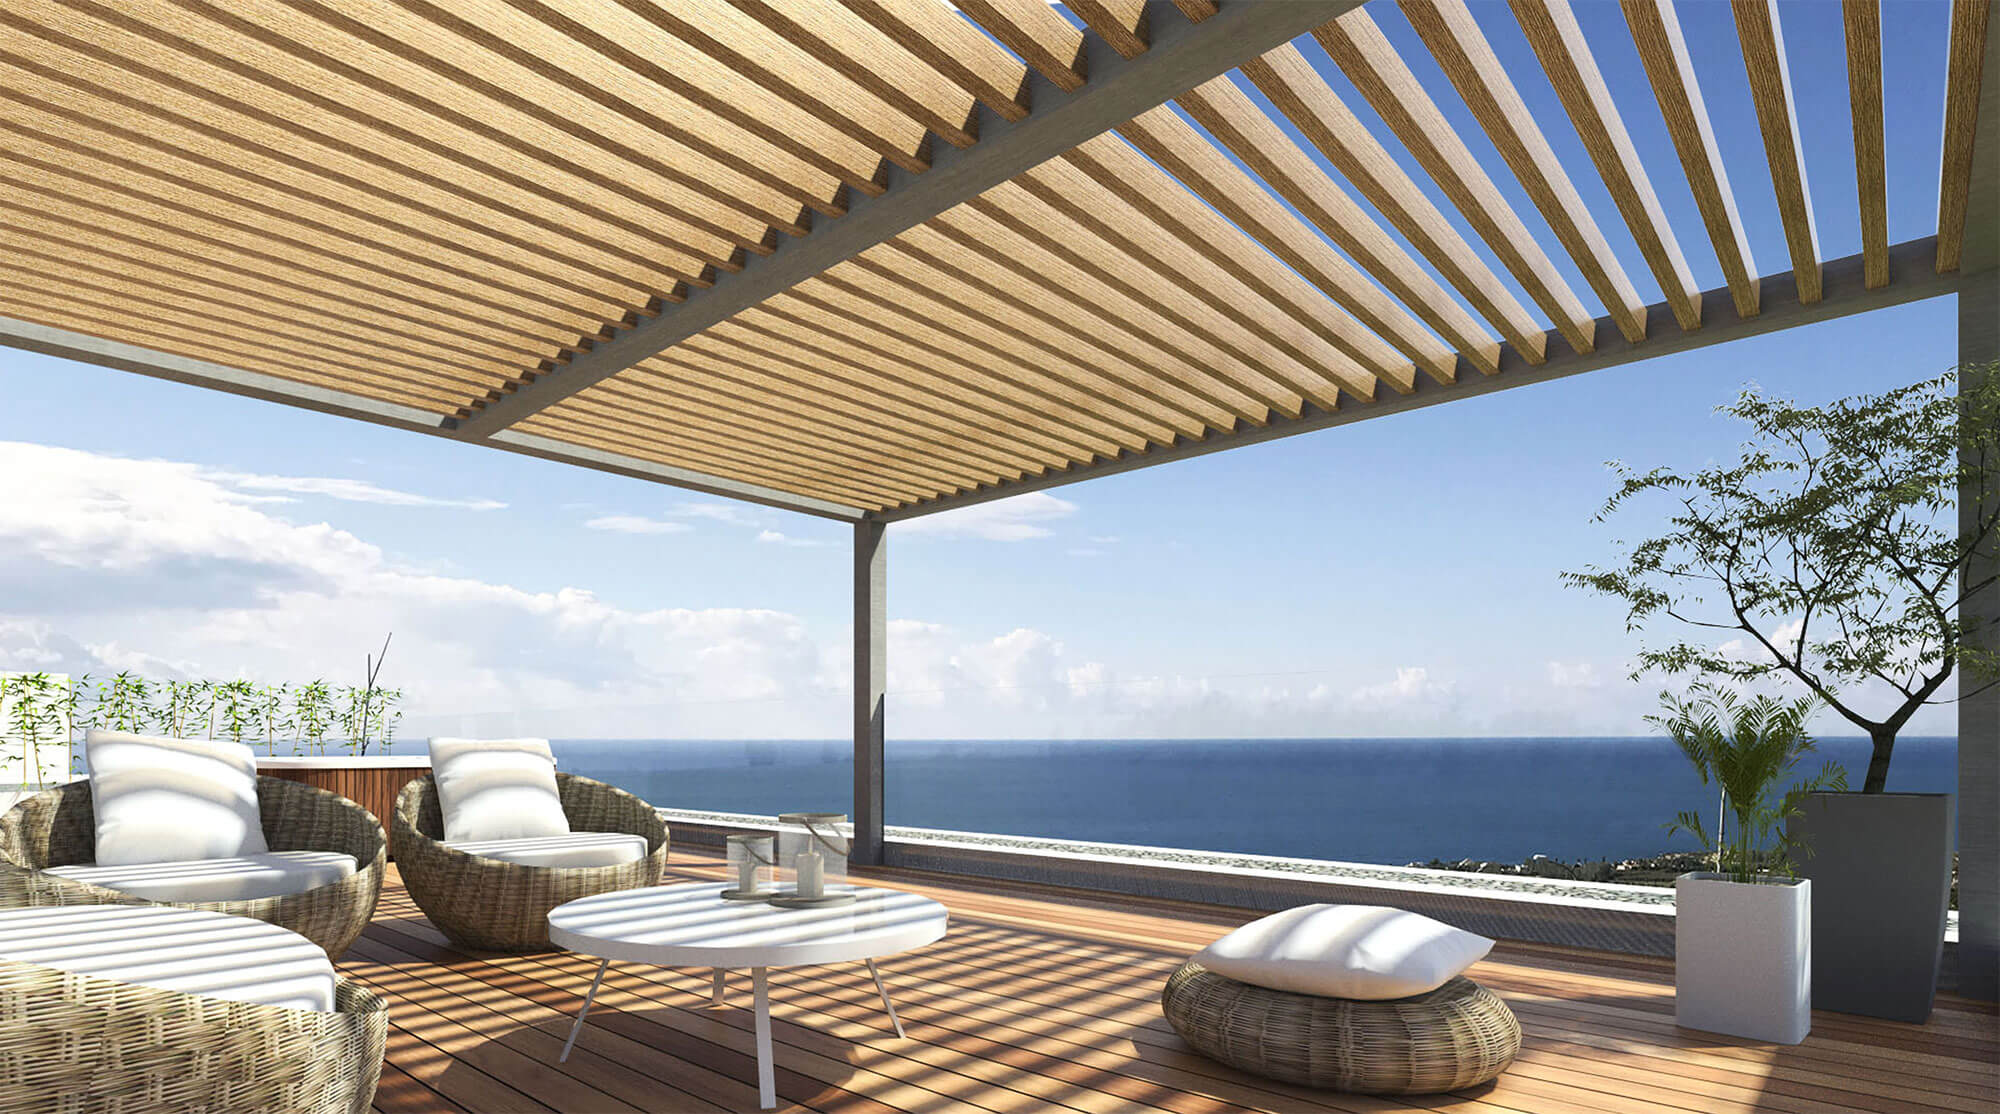 At an idyllic and tranquil location of distinct natural beauty in Peyia (Pafos District), overlooking the breath-taking west coast of the city, Aristo Developers has completed the design and proceeds to the development of another outstanding project.